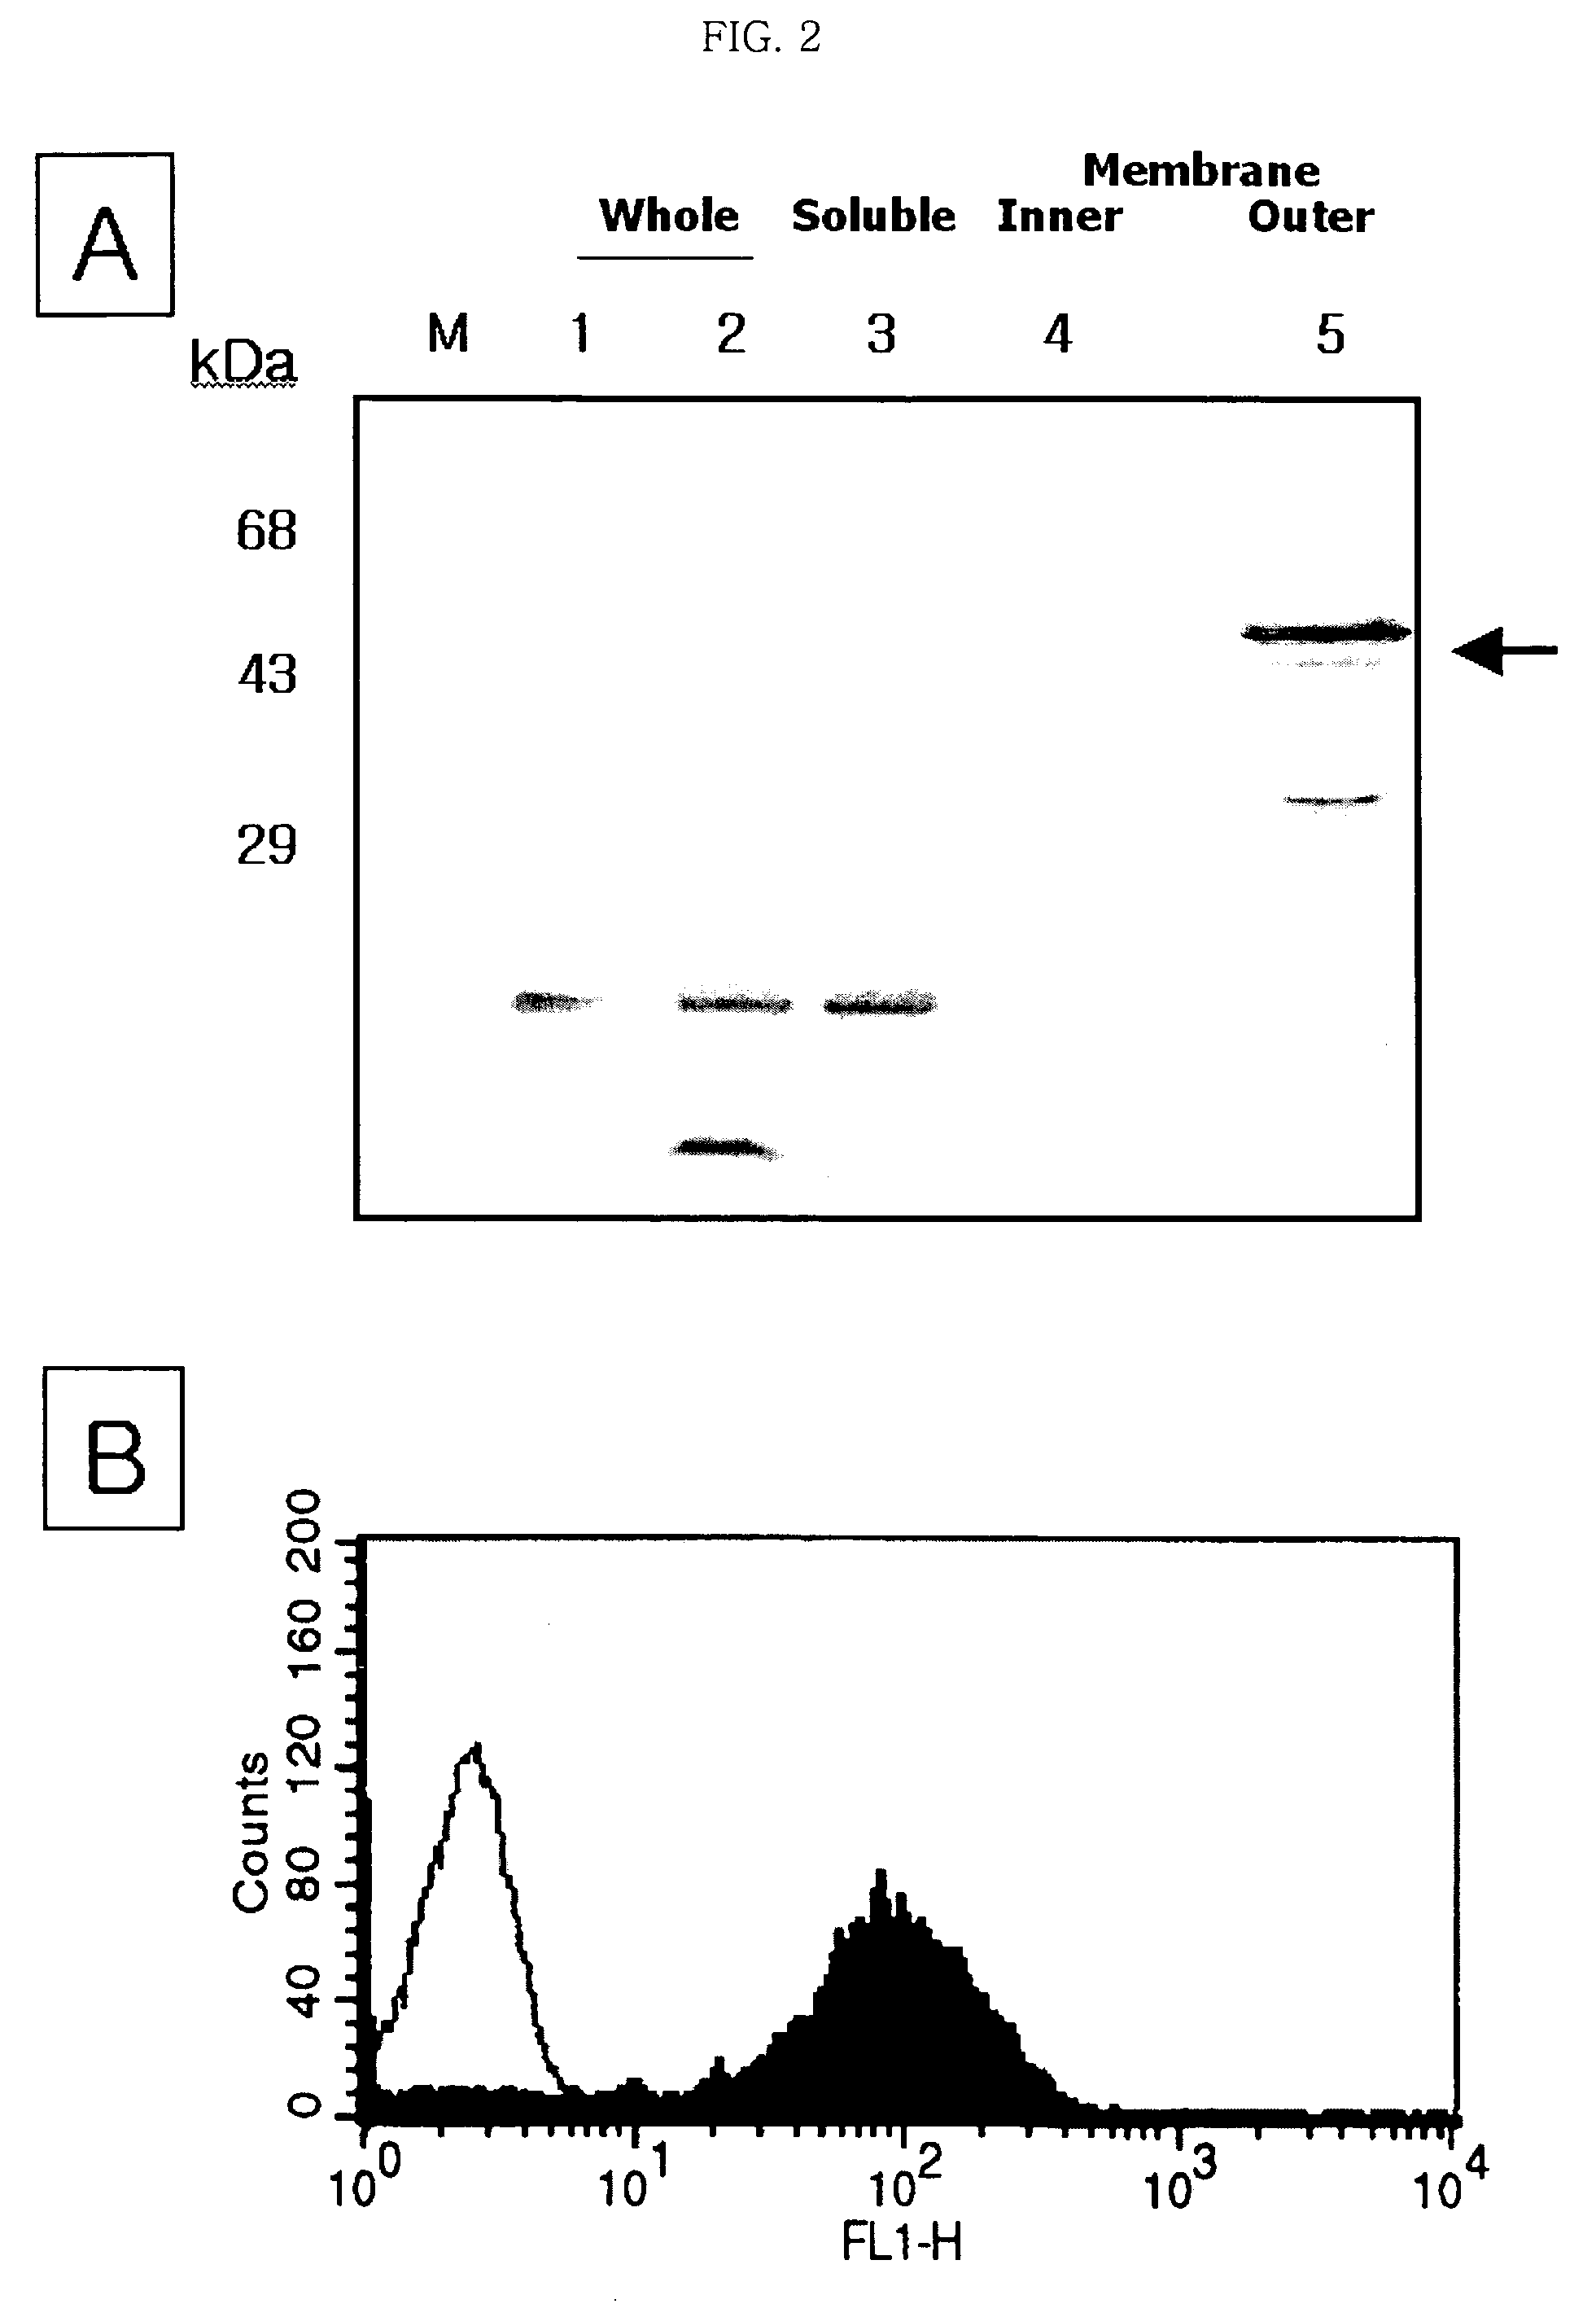 Surface expression vectors having pgsbca the gene coding poly-gamma-glutamate synthetase, and a method for expression of target protein at the surface of microorganism using the vector